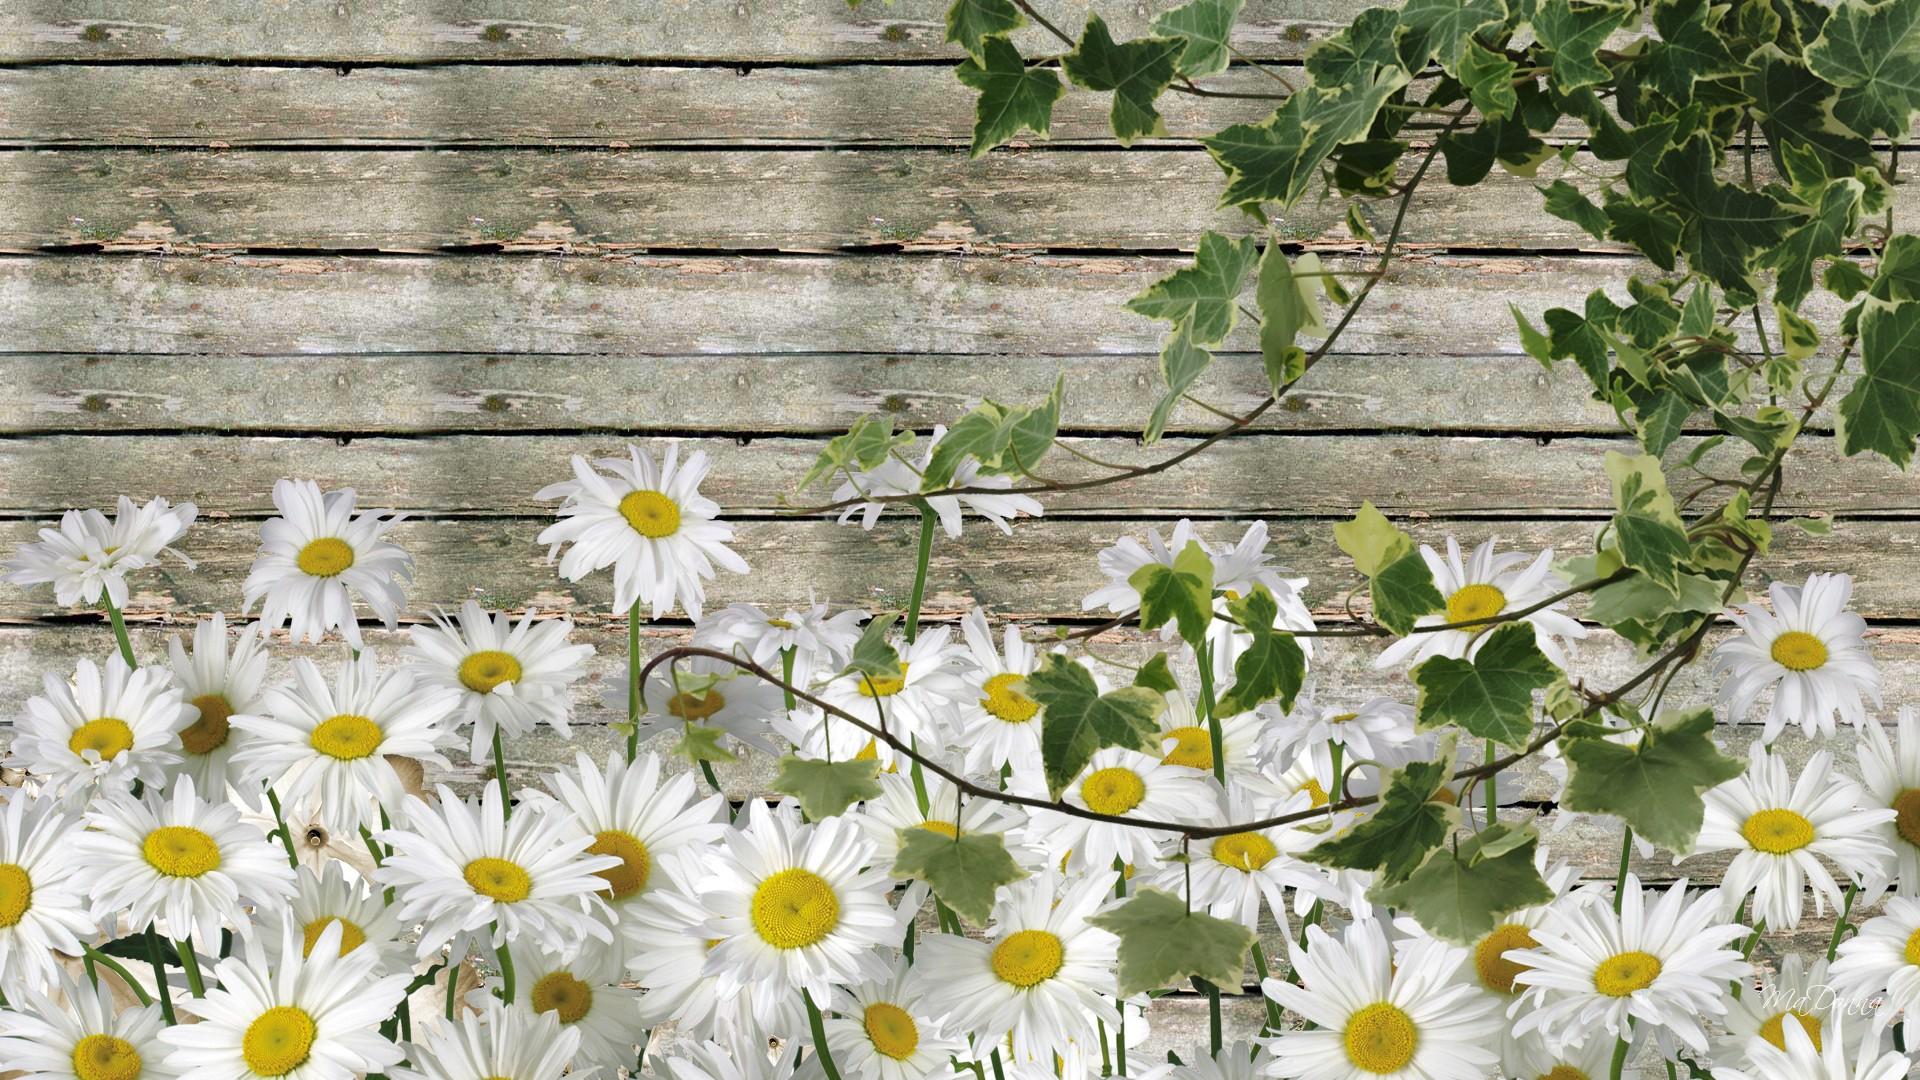 Daisies By Summer Barn Wallpaper Nature And Landscape Wallpaper Better